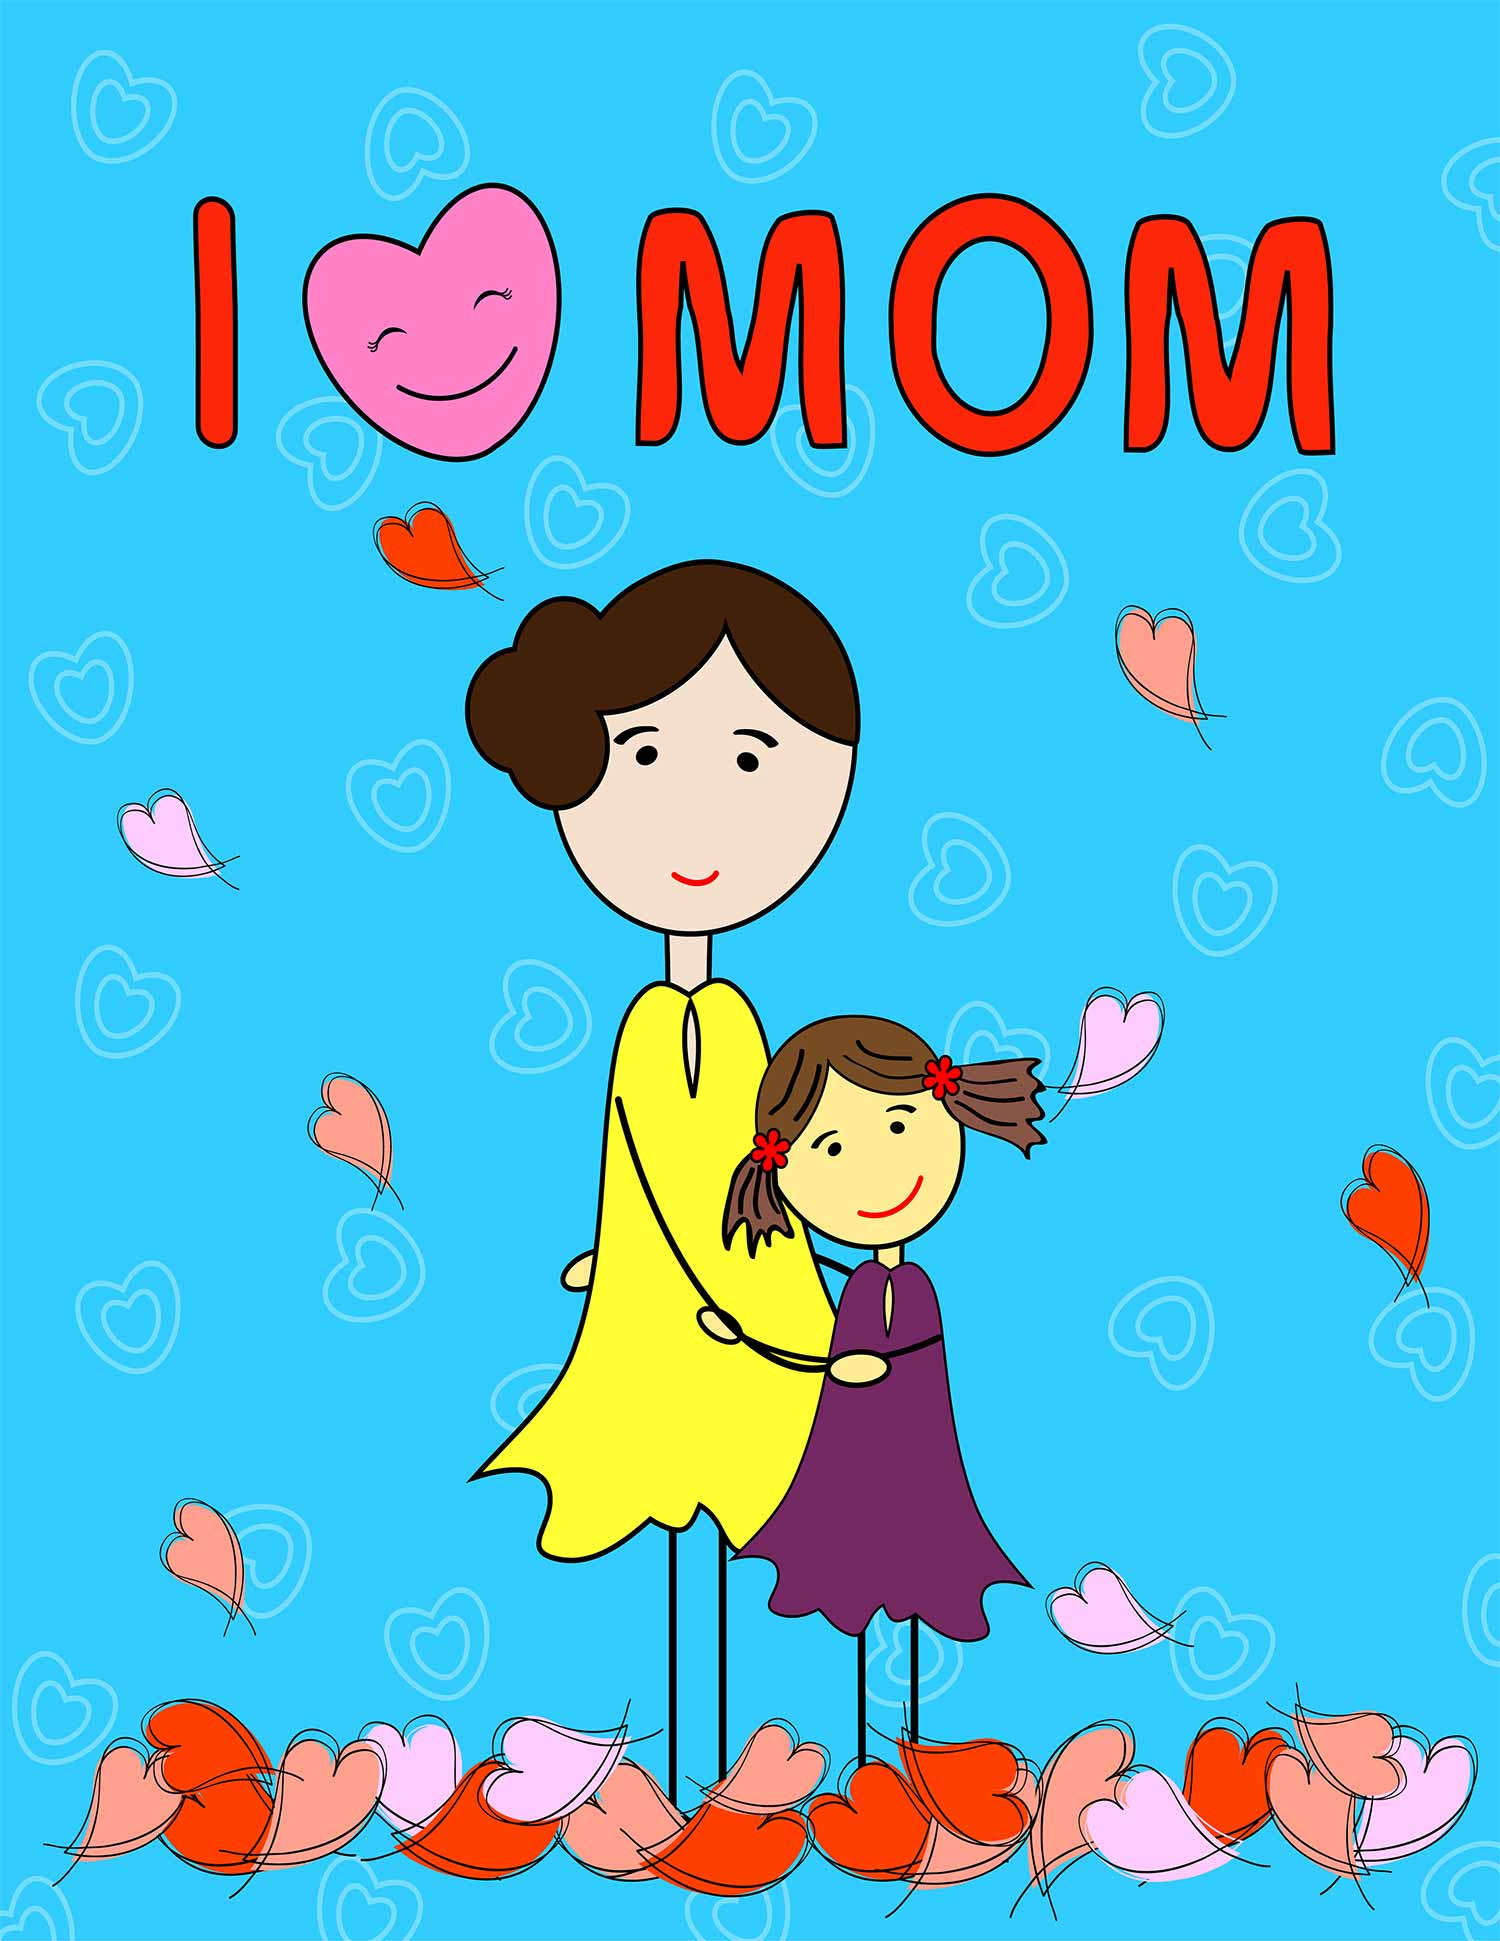 Free Printable Mother's Day card